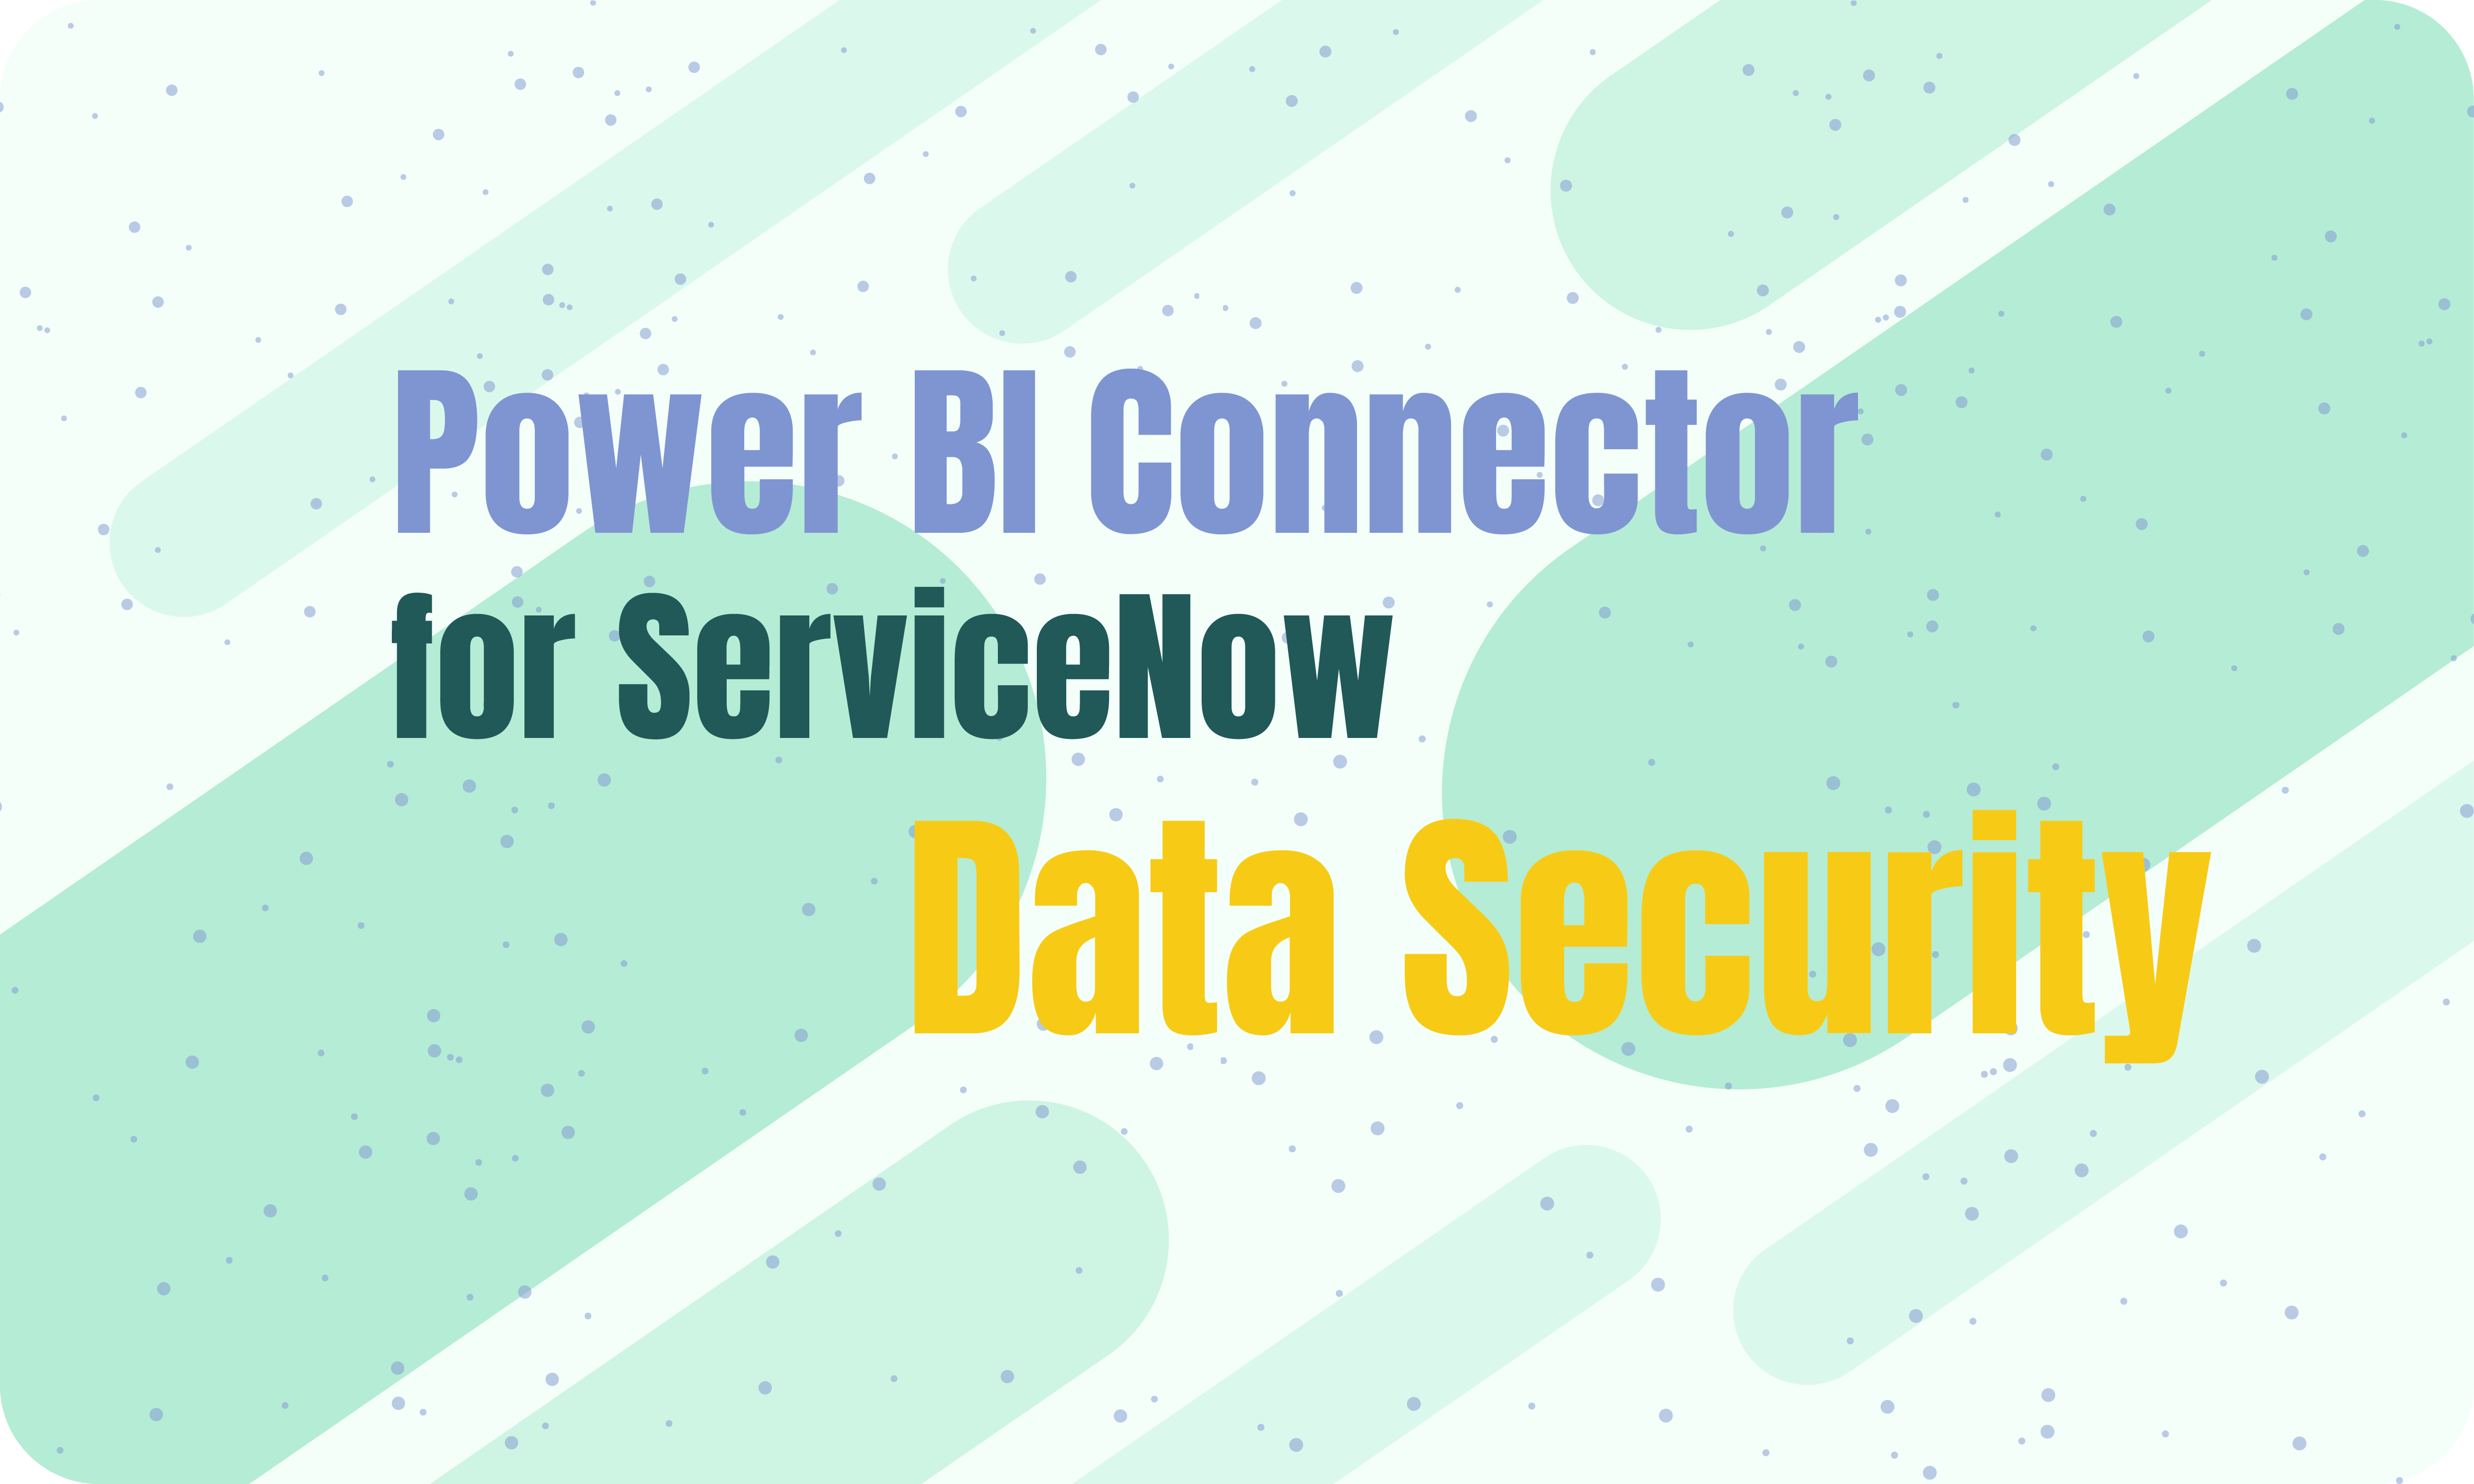 Power BI Connector for ServiceNow: Is My Data Secure 